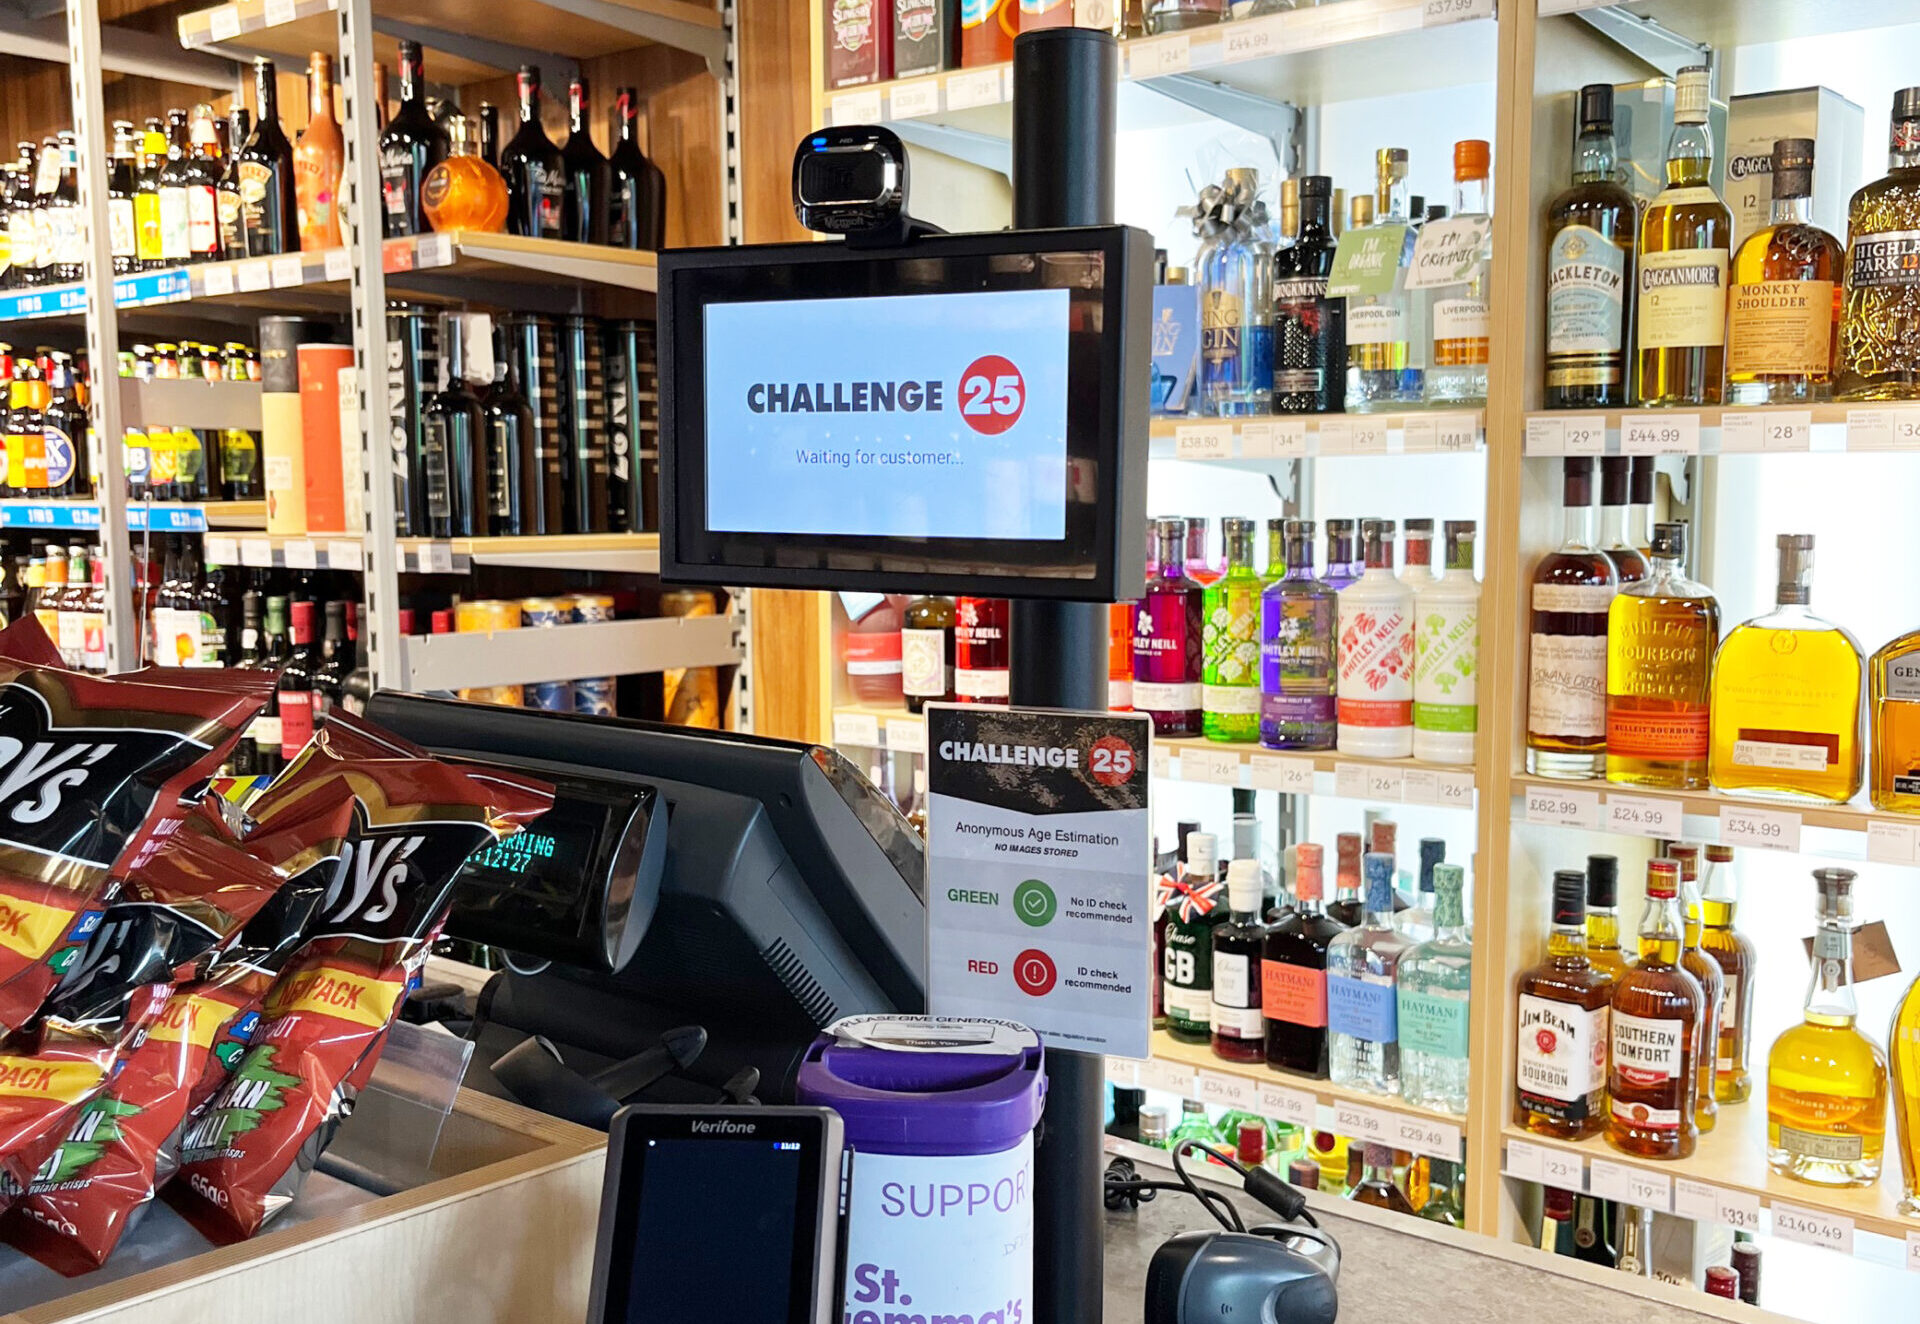 Bestway to extend digital ID trial in stores digital age verification for alcohol purchases in stores